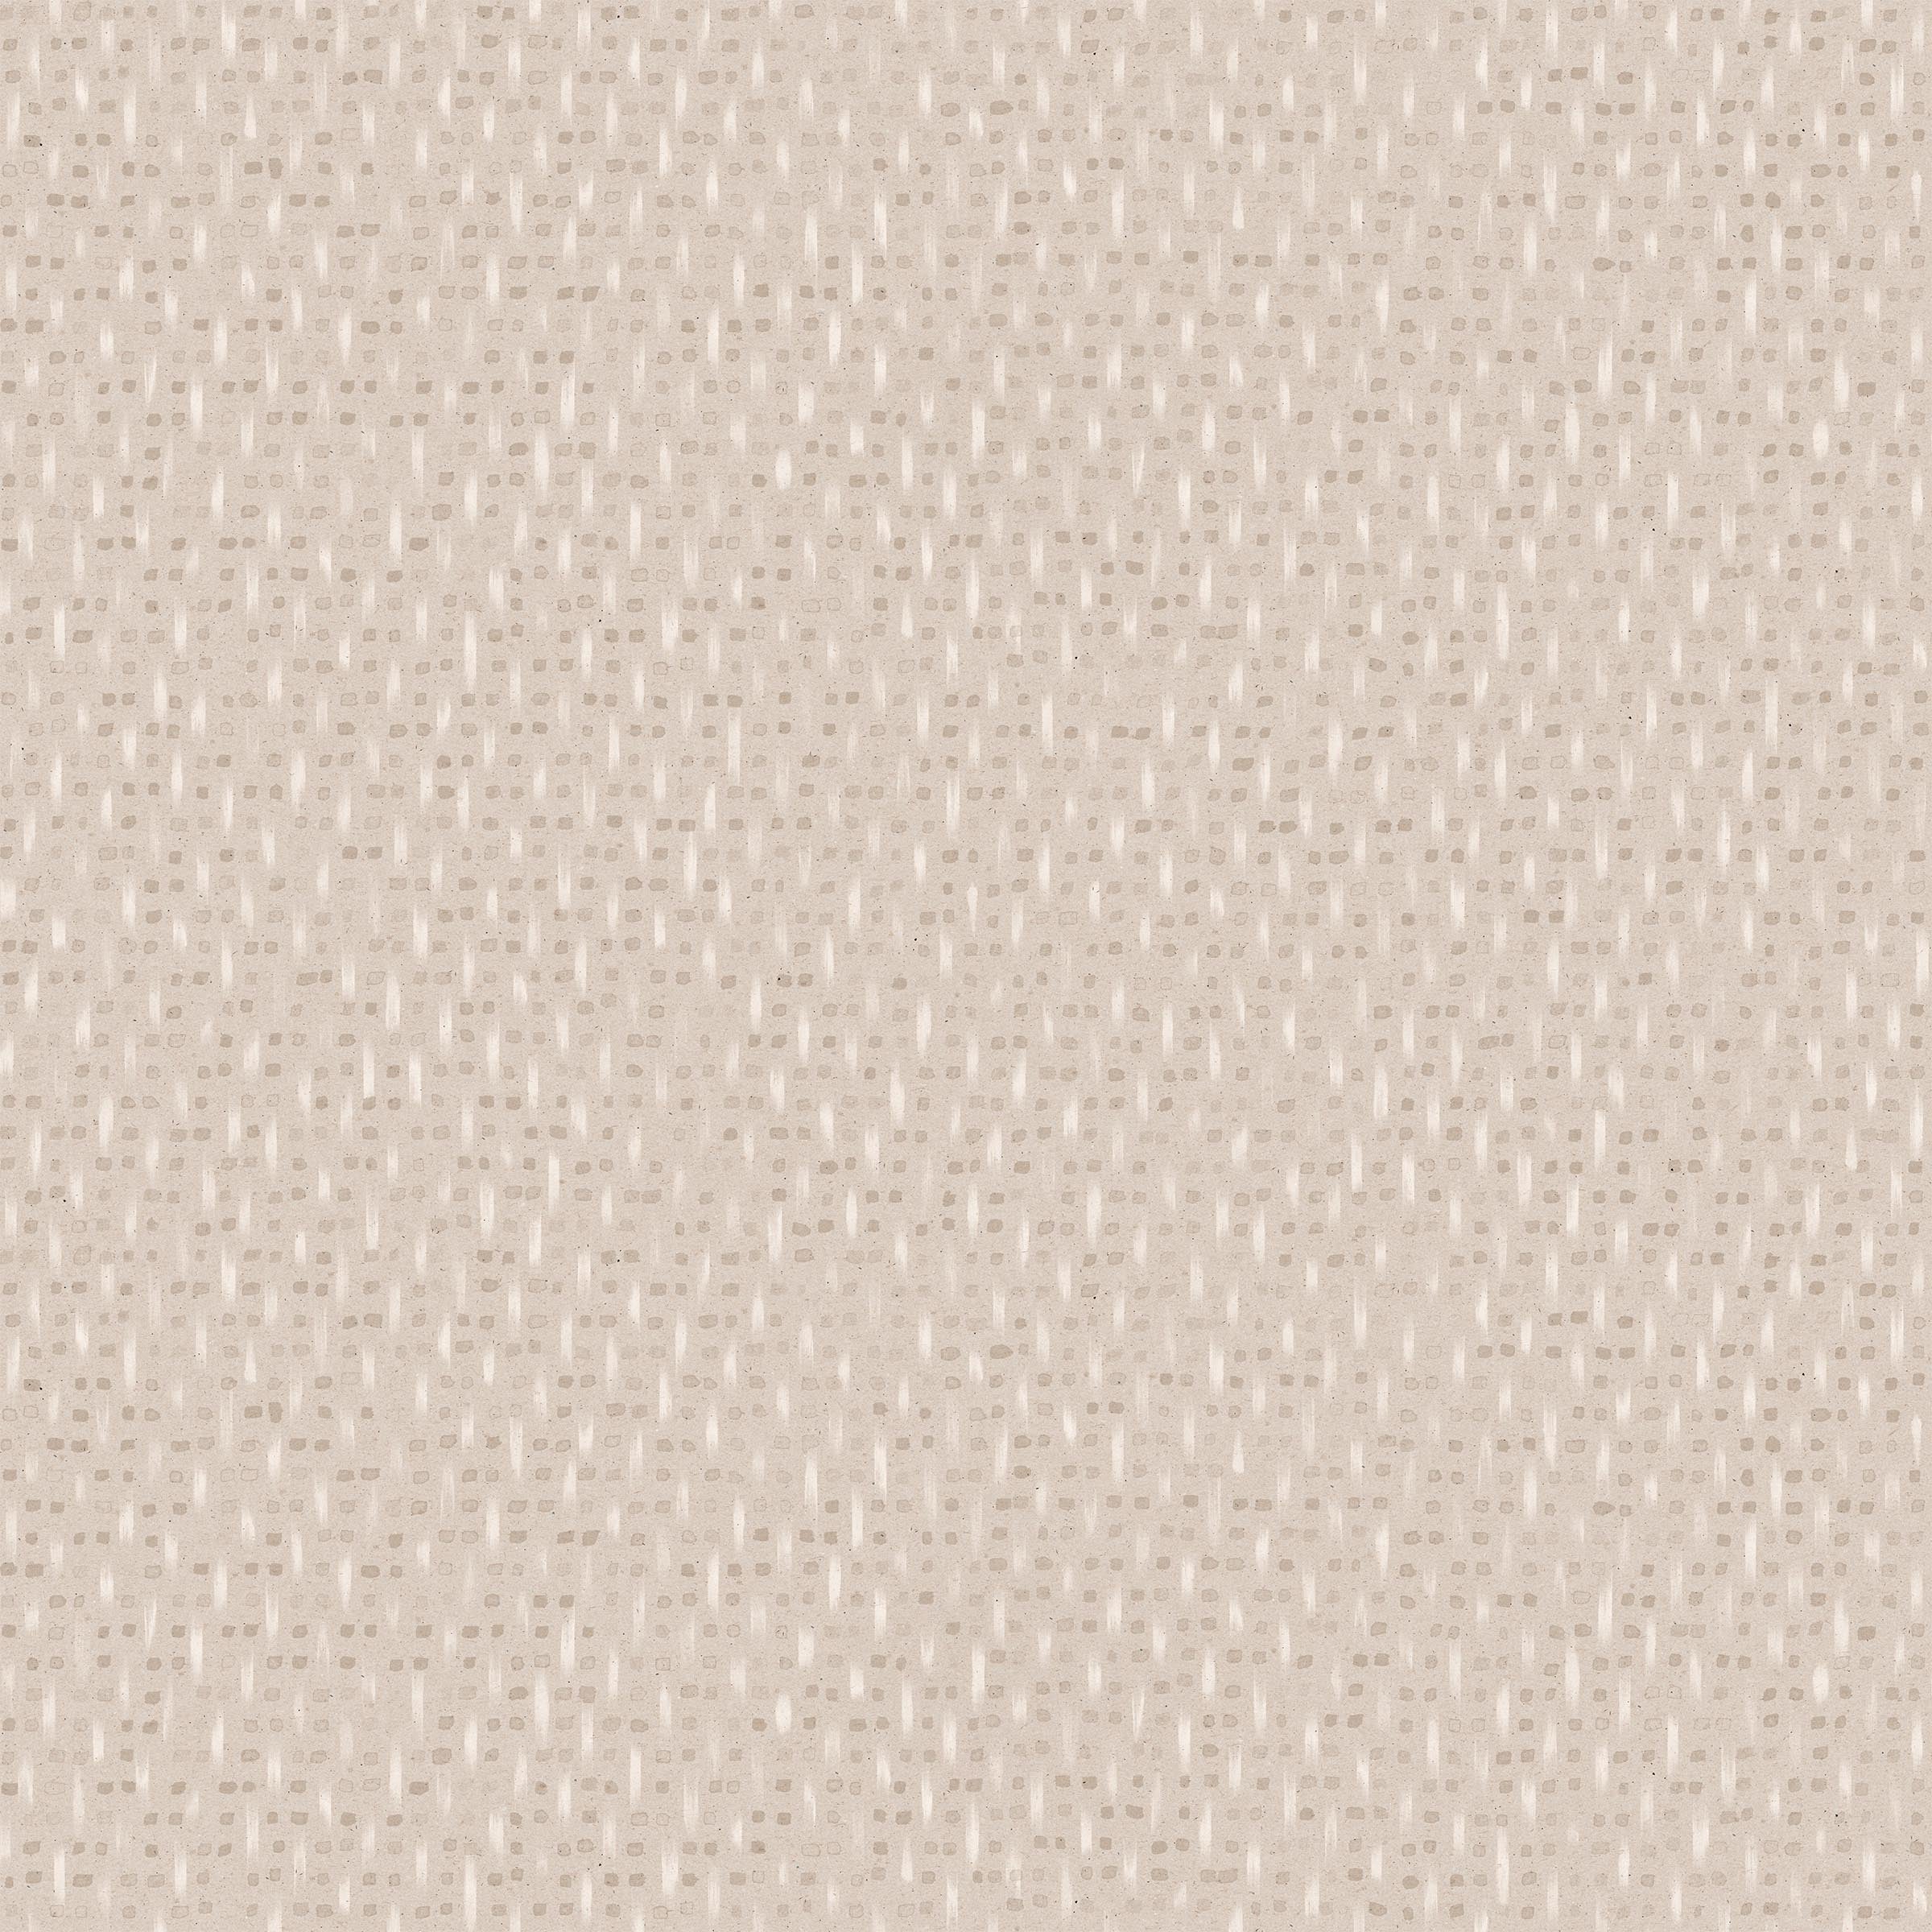 Detail of wallpaper in a small-scale dot and dash pattern in tan and white on a cream field.